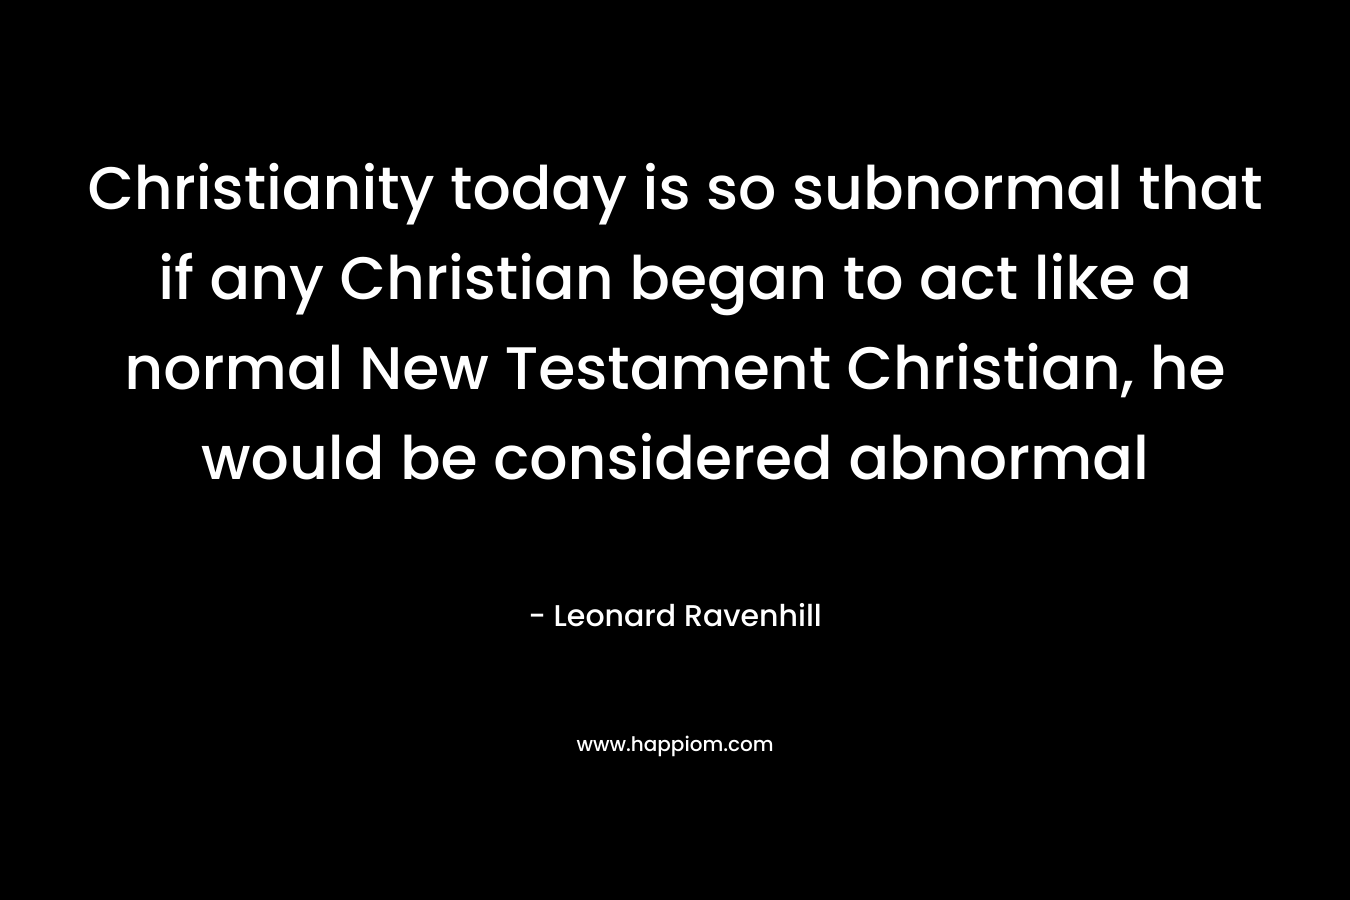 Christianity today is so subnormal that if any Christian began to act like a normal New Testament Christian, he would be considered abnormal